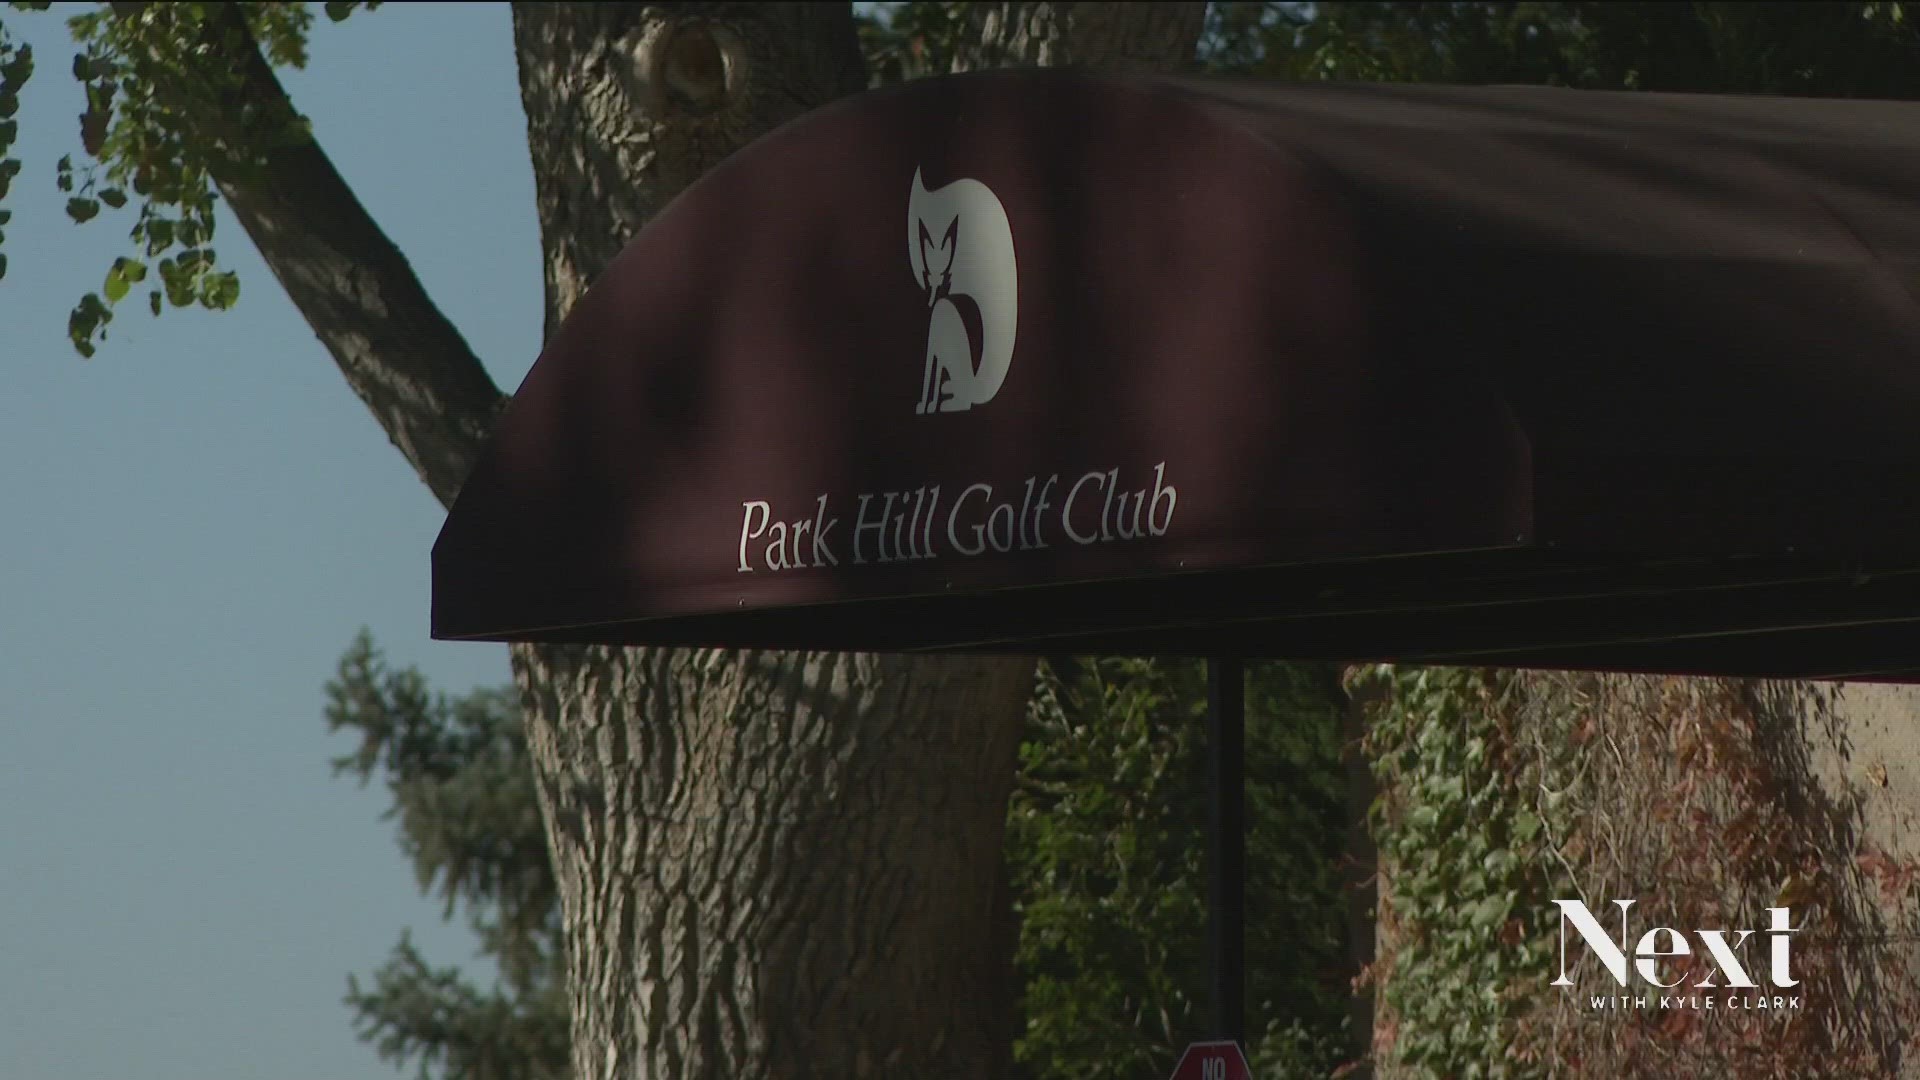 The investors who want to develop Park Hill's Golf course want to keep information about their ongoing lawsuit under wraps before voters decide its fate in April.